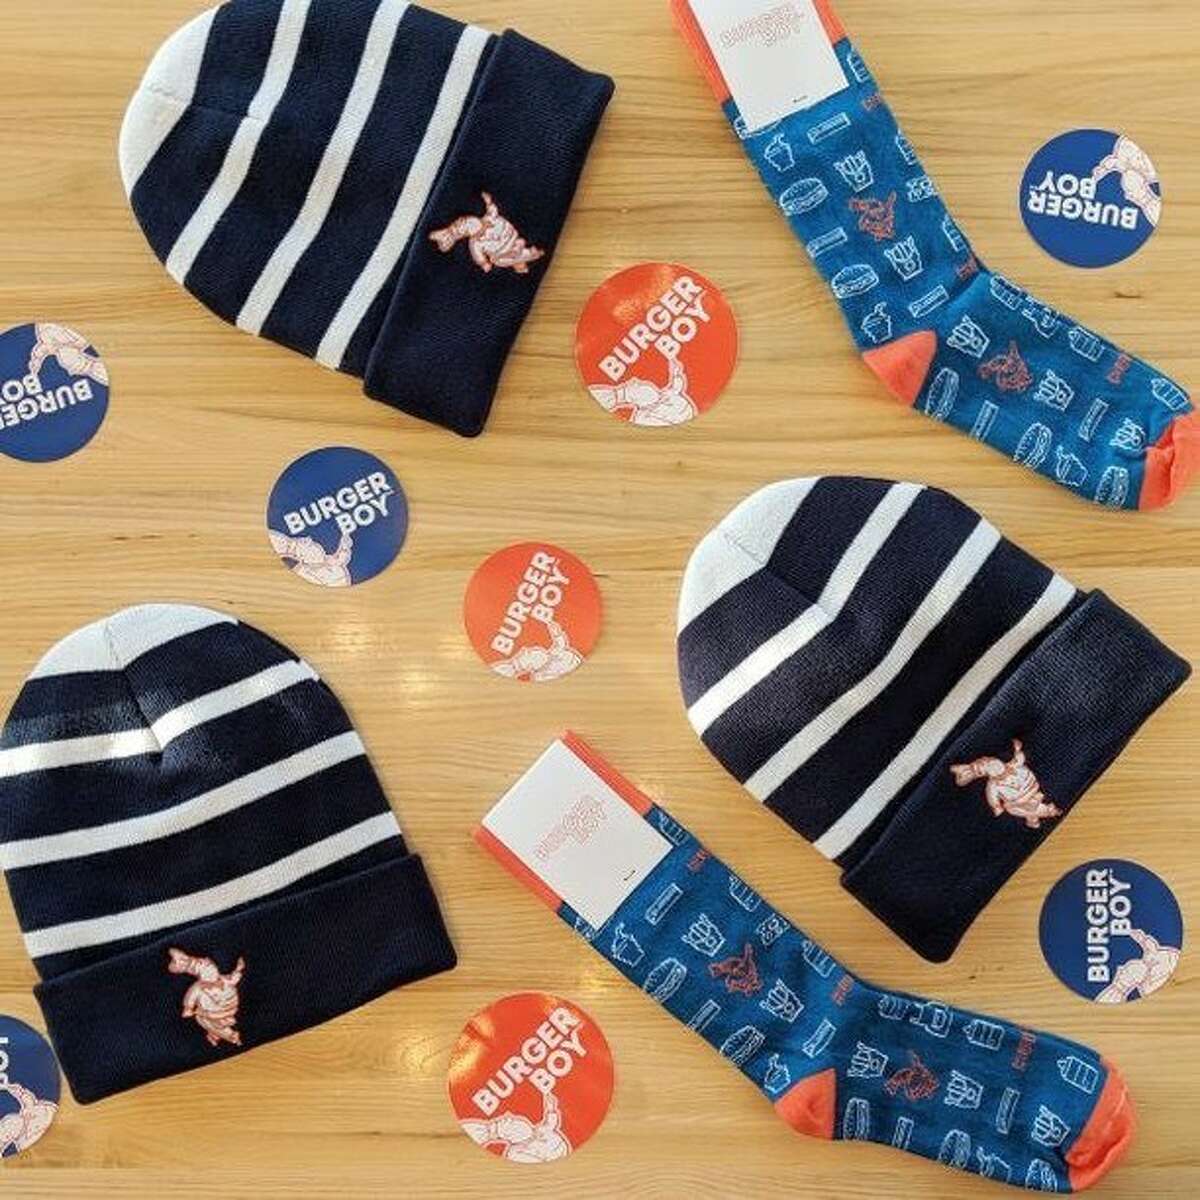 Stay warm and cozy with beanies and socks sold exclusively at Burger Boy locations.